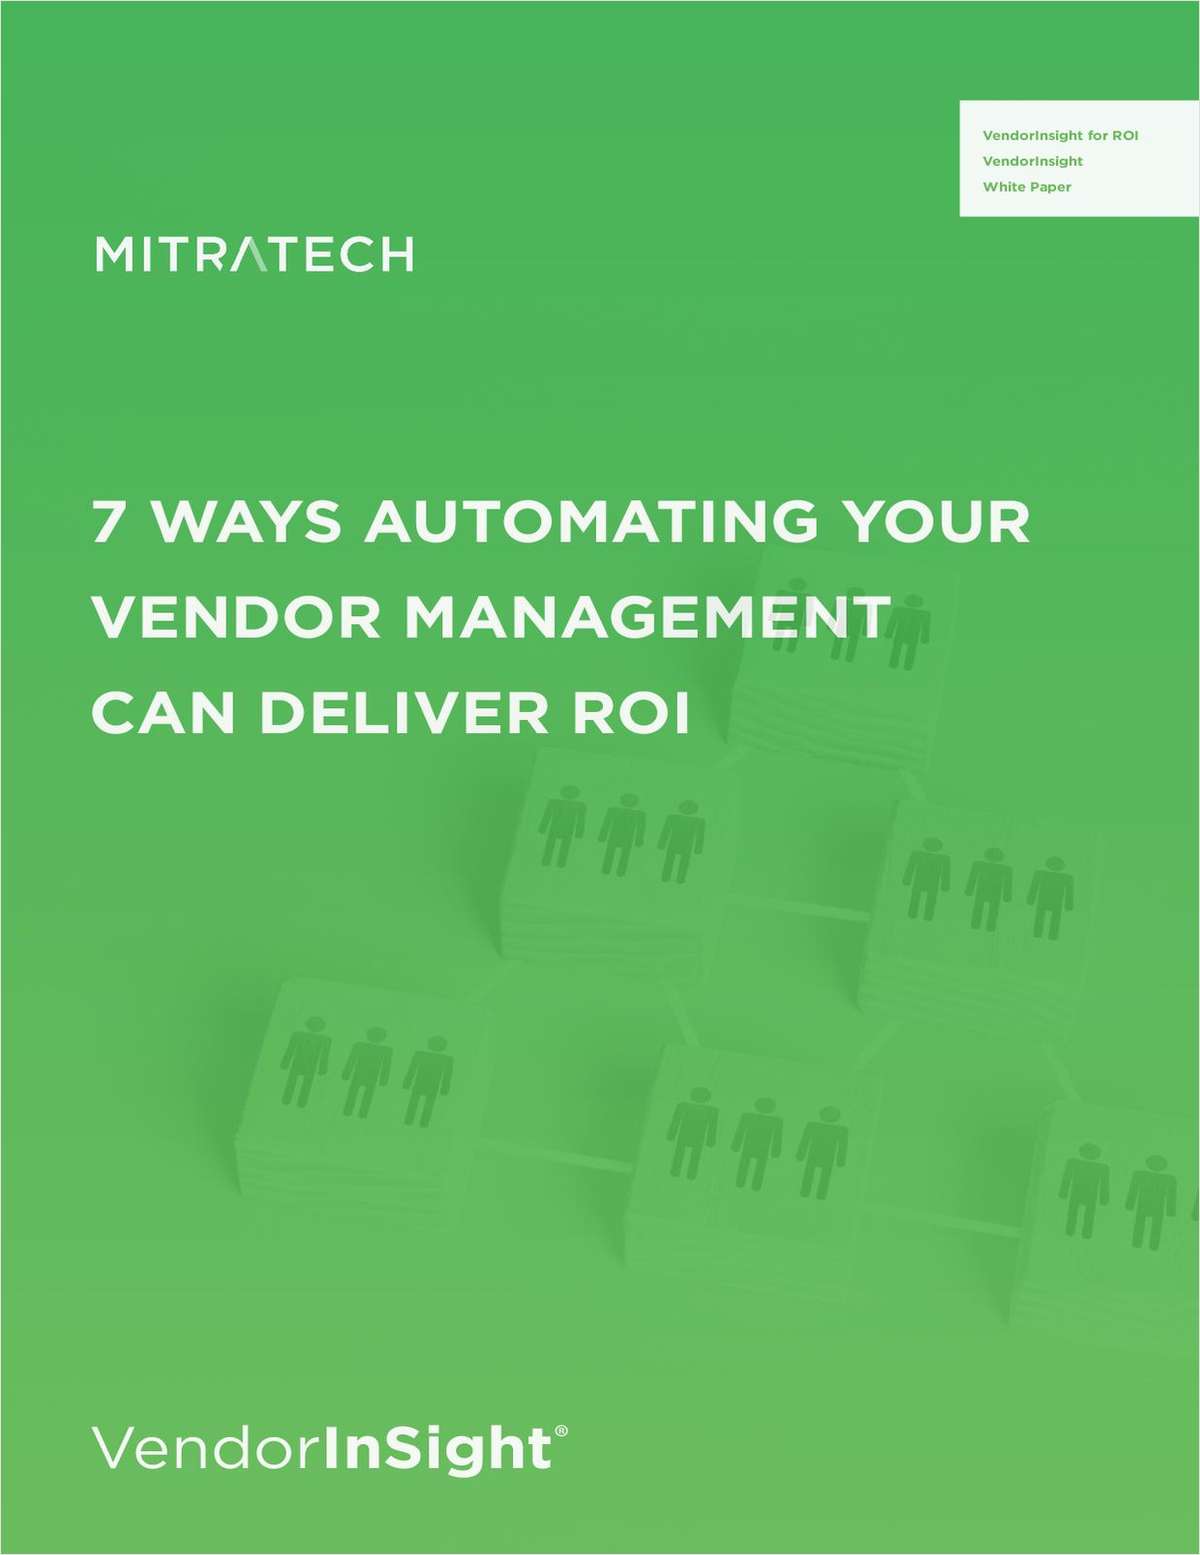 7 Ways Automating Your Vendor Management Can Deliver ROI